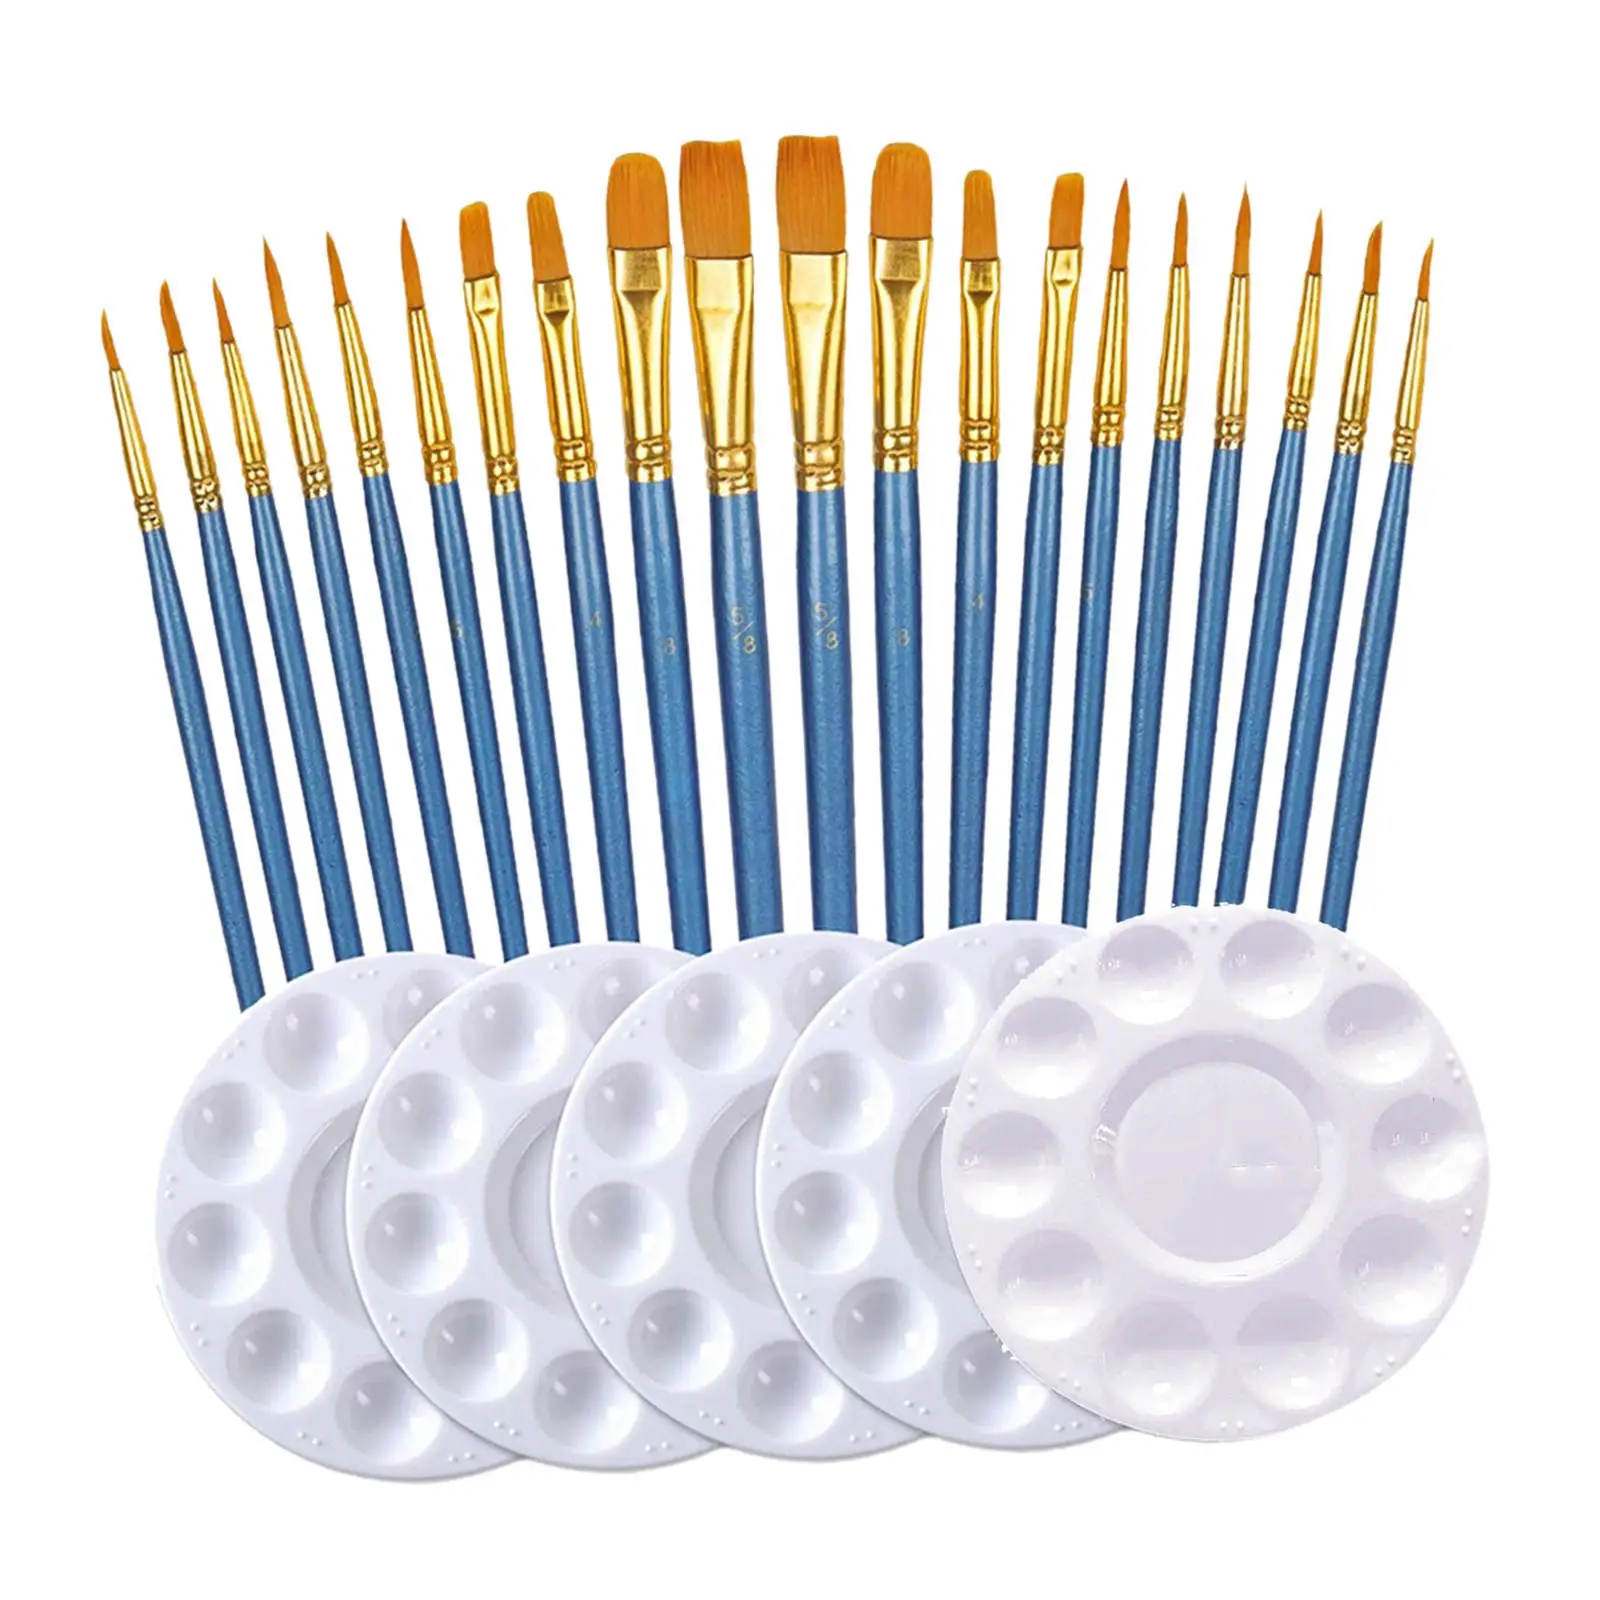 25x Nylon Hair Brushes Drawing Long Wooden Handle Art Supplies Paint Brushes Palette Set Acrylic Painting for Wall Arts Projects